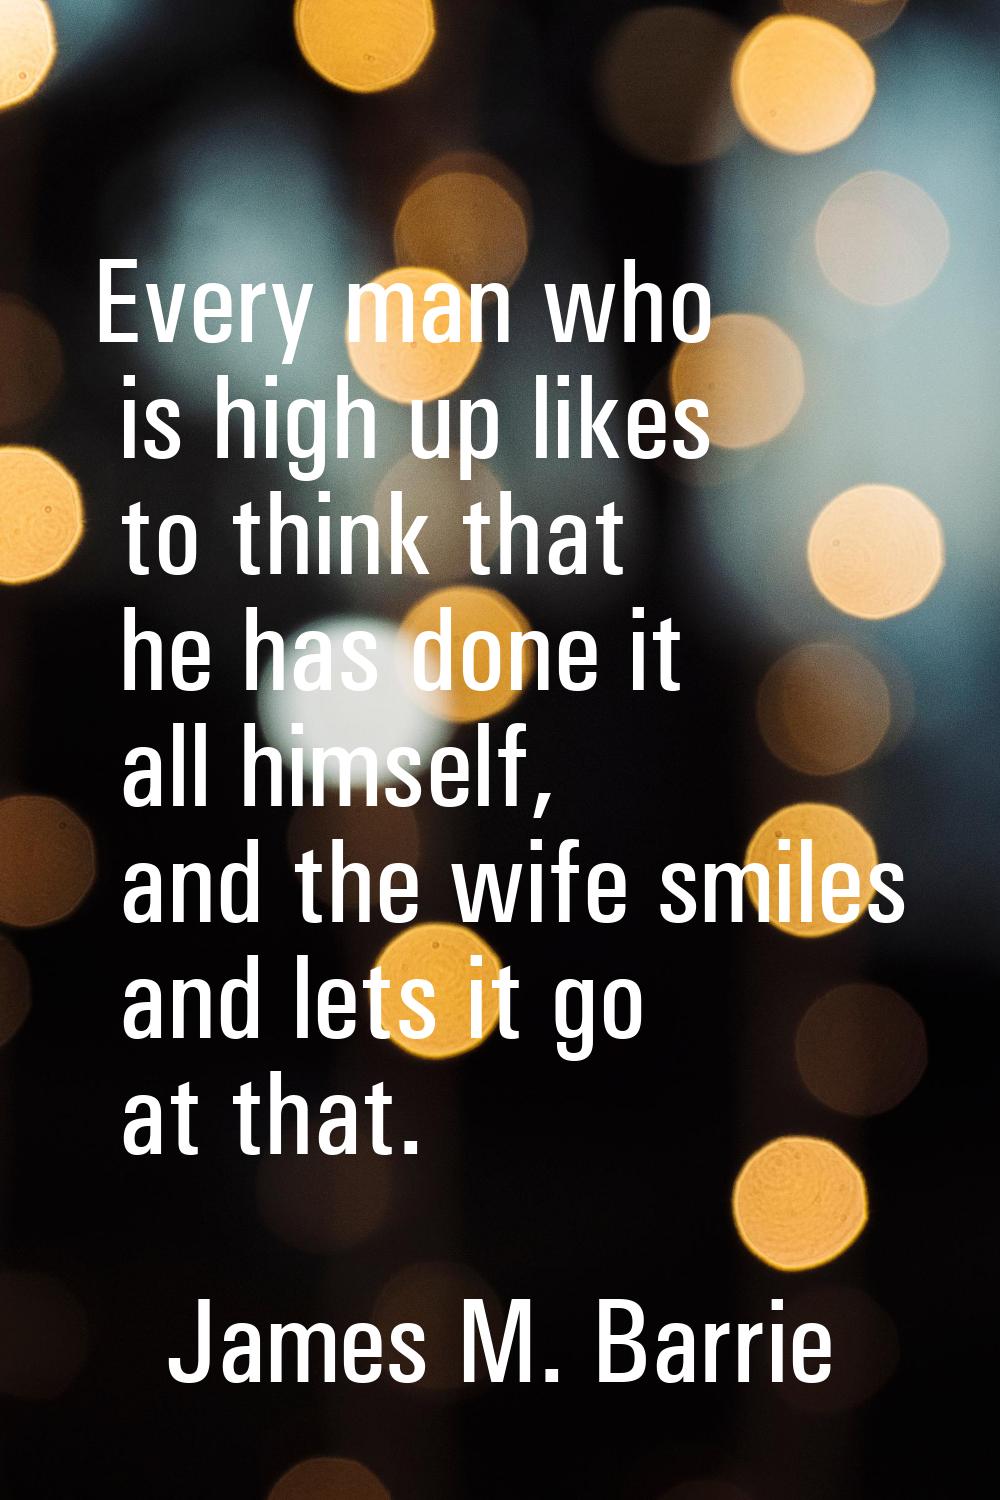 Every man who is high up likes to think that he has done it all himself, and the wife smiles and le